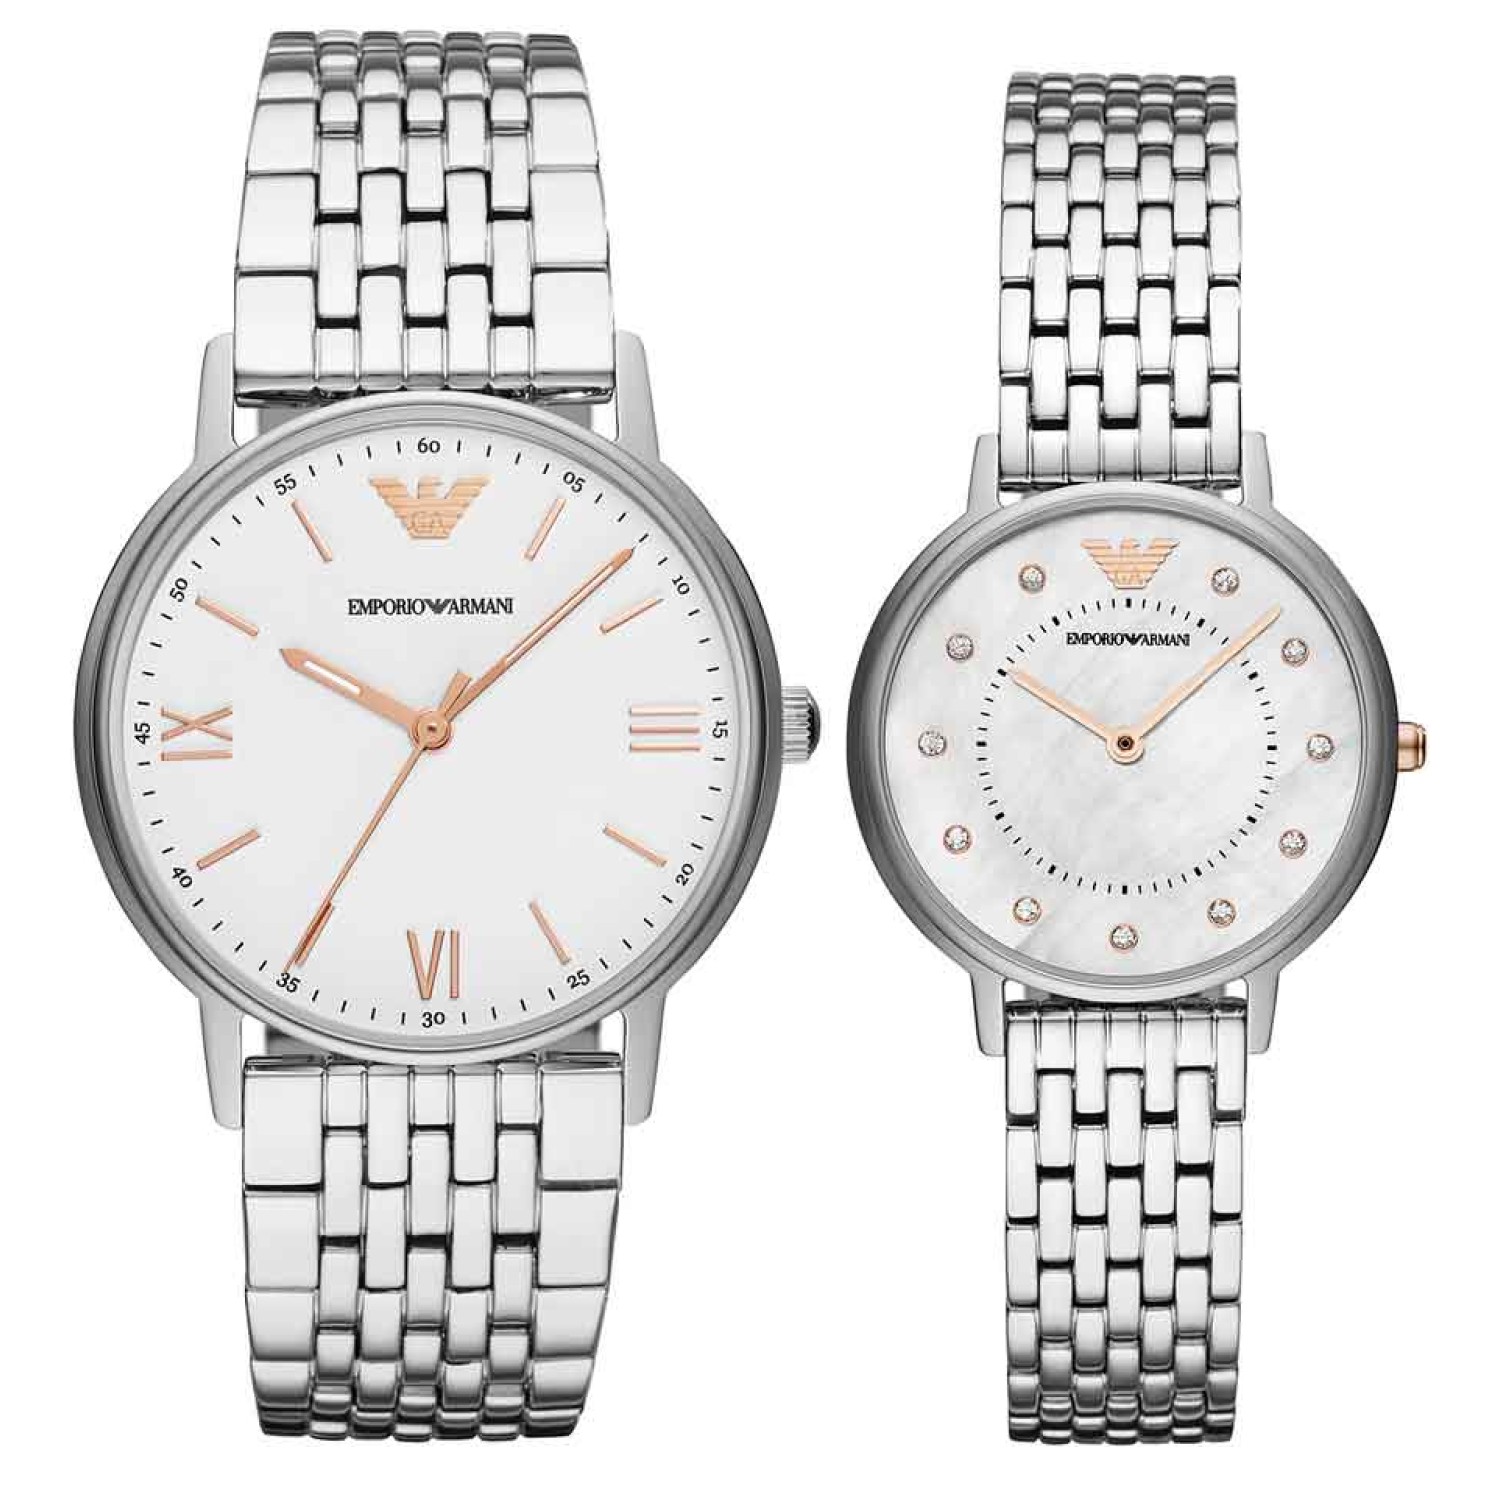 AR80014 Emporio Armani Mens and Ladies Matching Gift Set. This gift boxed watch set from Emporio Armani features a mens watch with a stainless-steel case, matte white dial with rose gold-tone Roman numerals and a polished seven-link bracelet. The set also